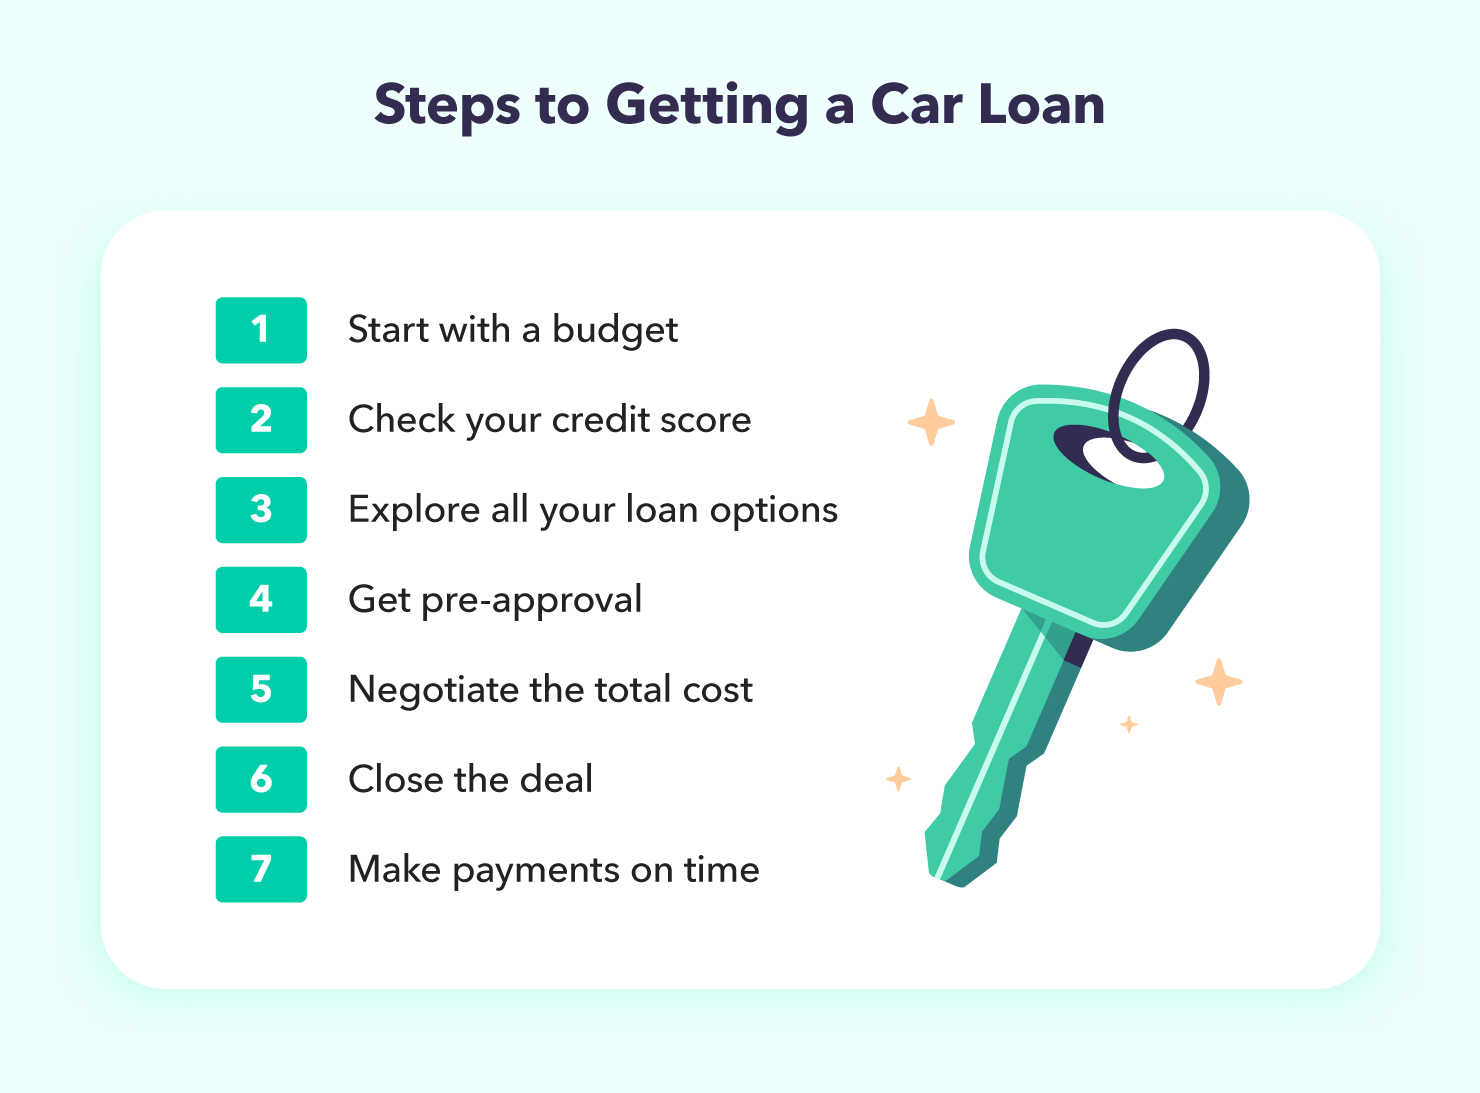 Steps to getting a car loan: 1) start with a budget, 2) check your credit score, 3) explore all your loan options, 4) get pre-approval, 5) negotiate the total cost, 6) close the deal, 7) make payments on time.